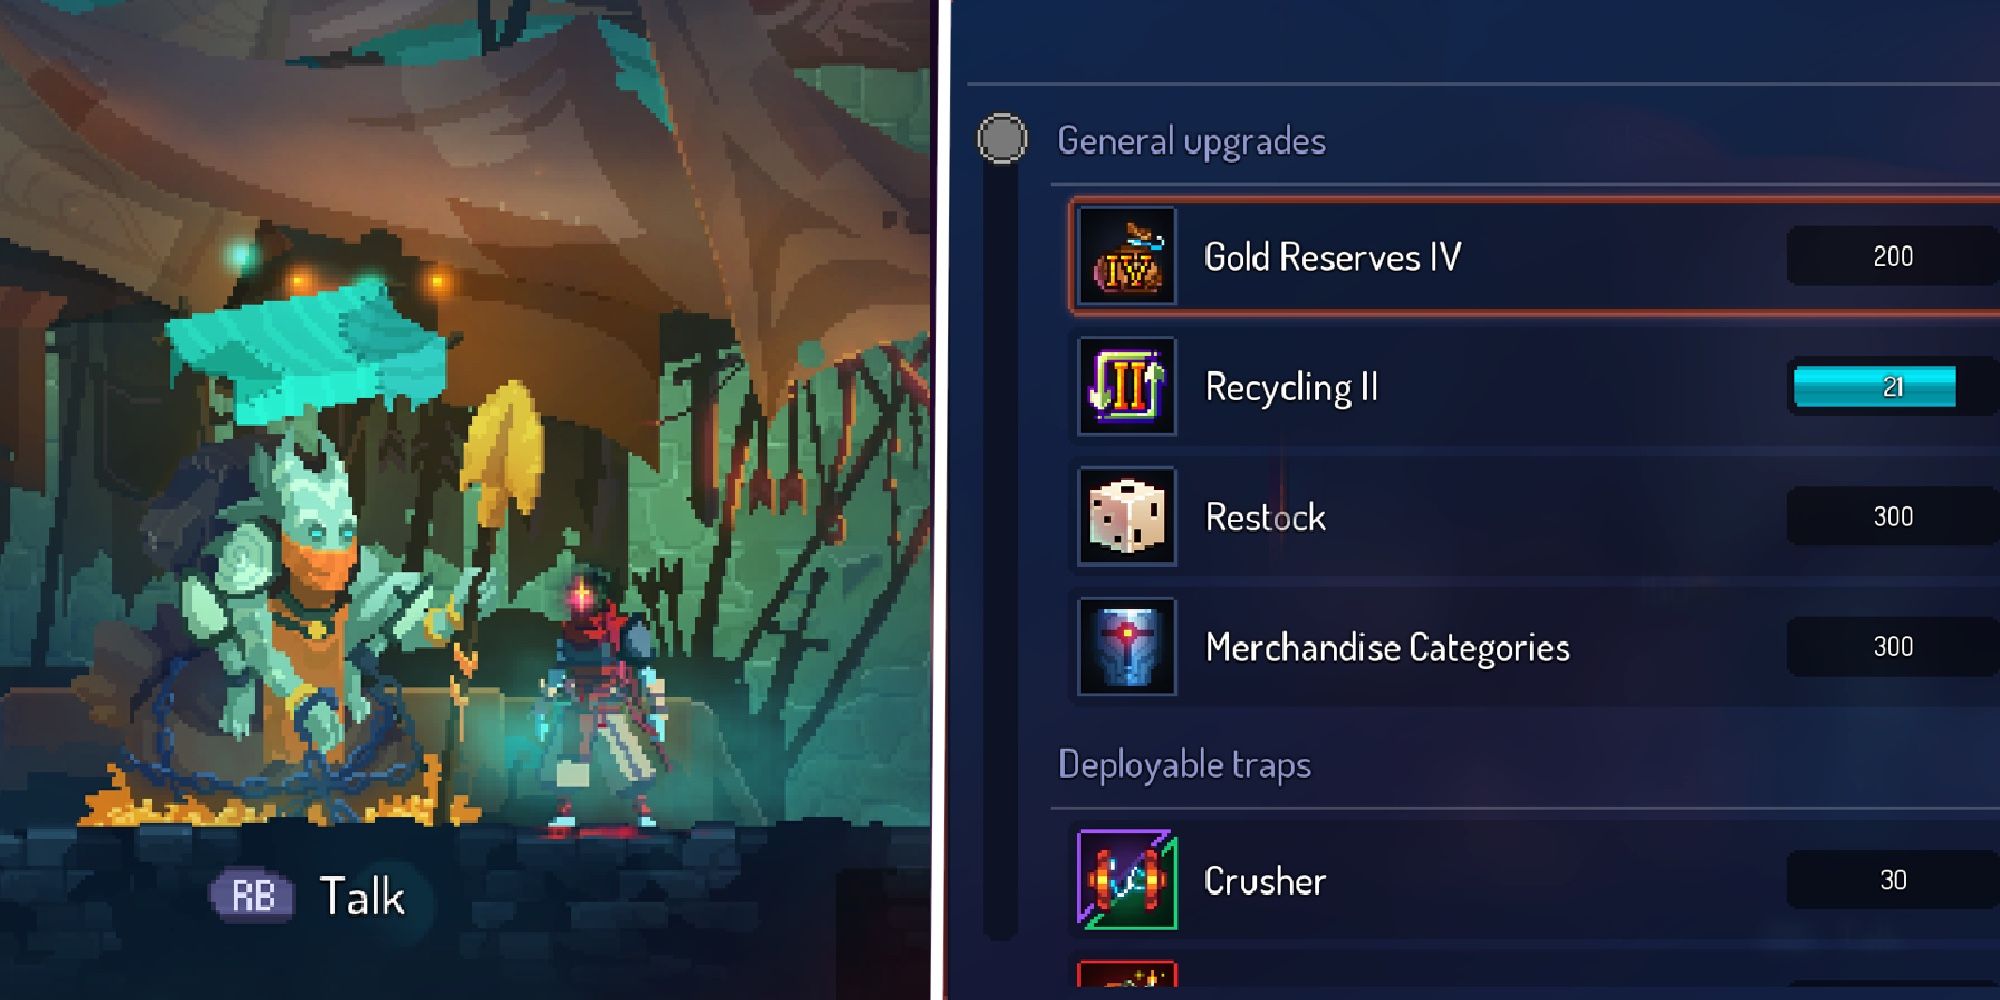 Split Image Of Dead Cells Purchase Screens For Gold And Cells